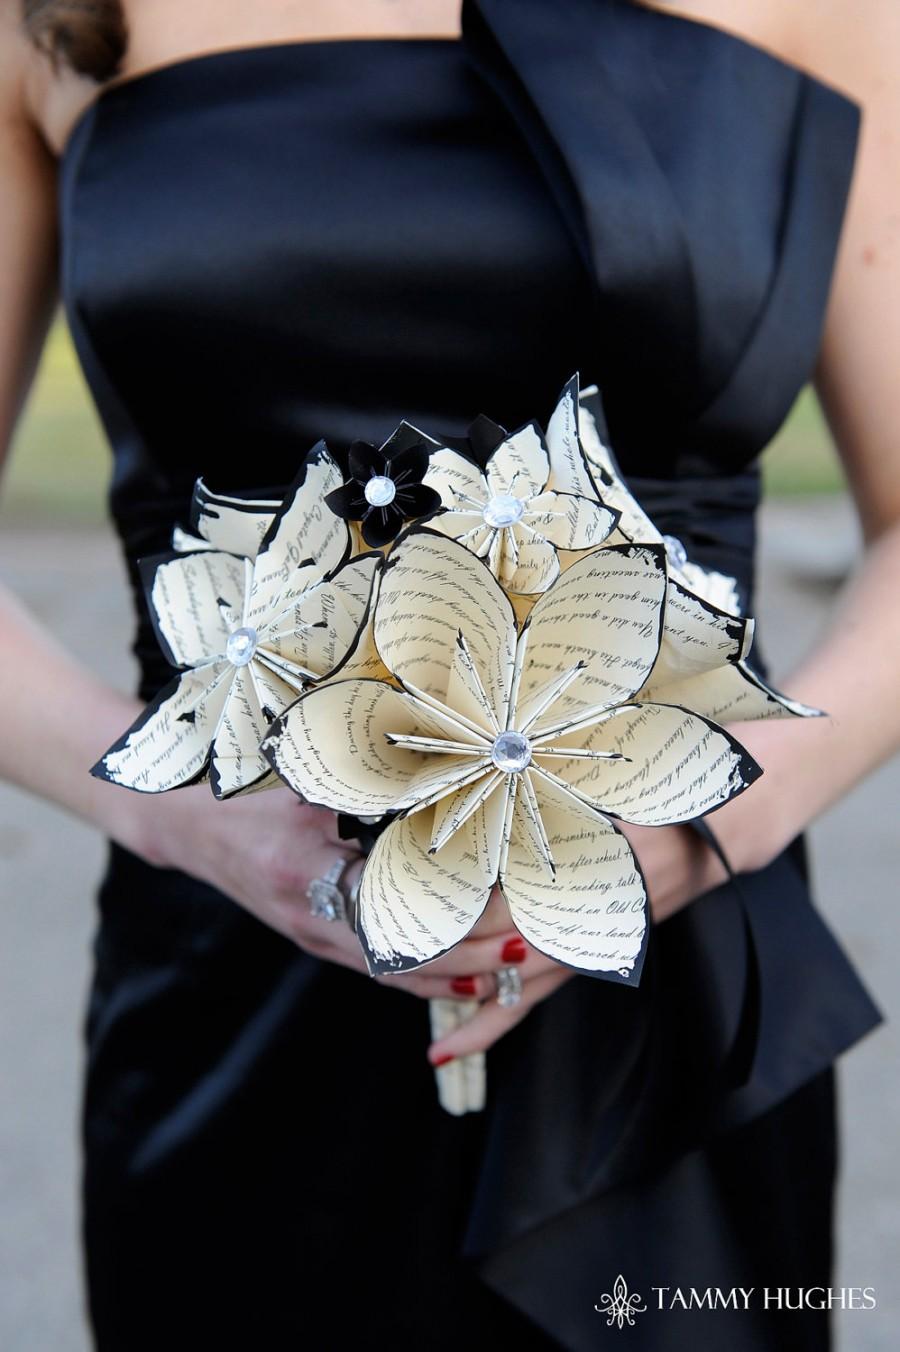 Hochzeit - Customized Bridal Bouquet- 12 inch, 20 flowers, made to order, wedding, centerpiece, custom paper flowers, one of a kind origami